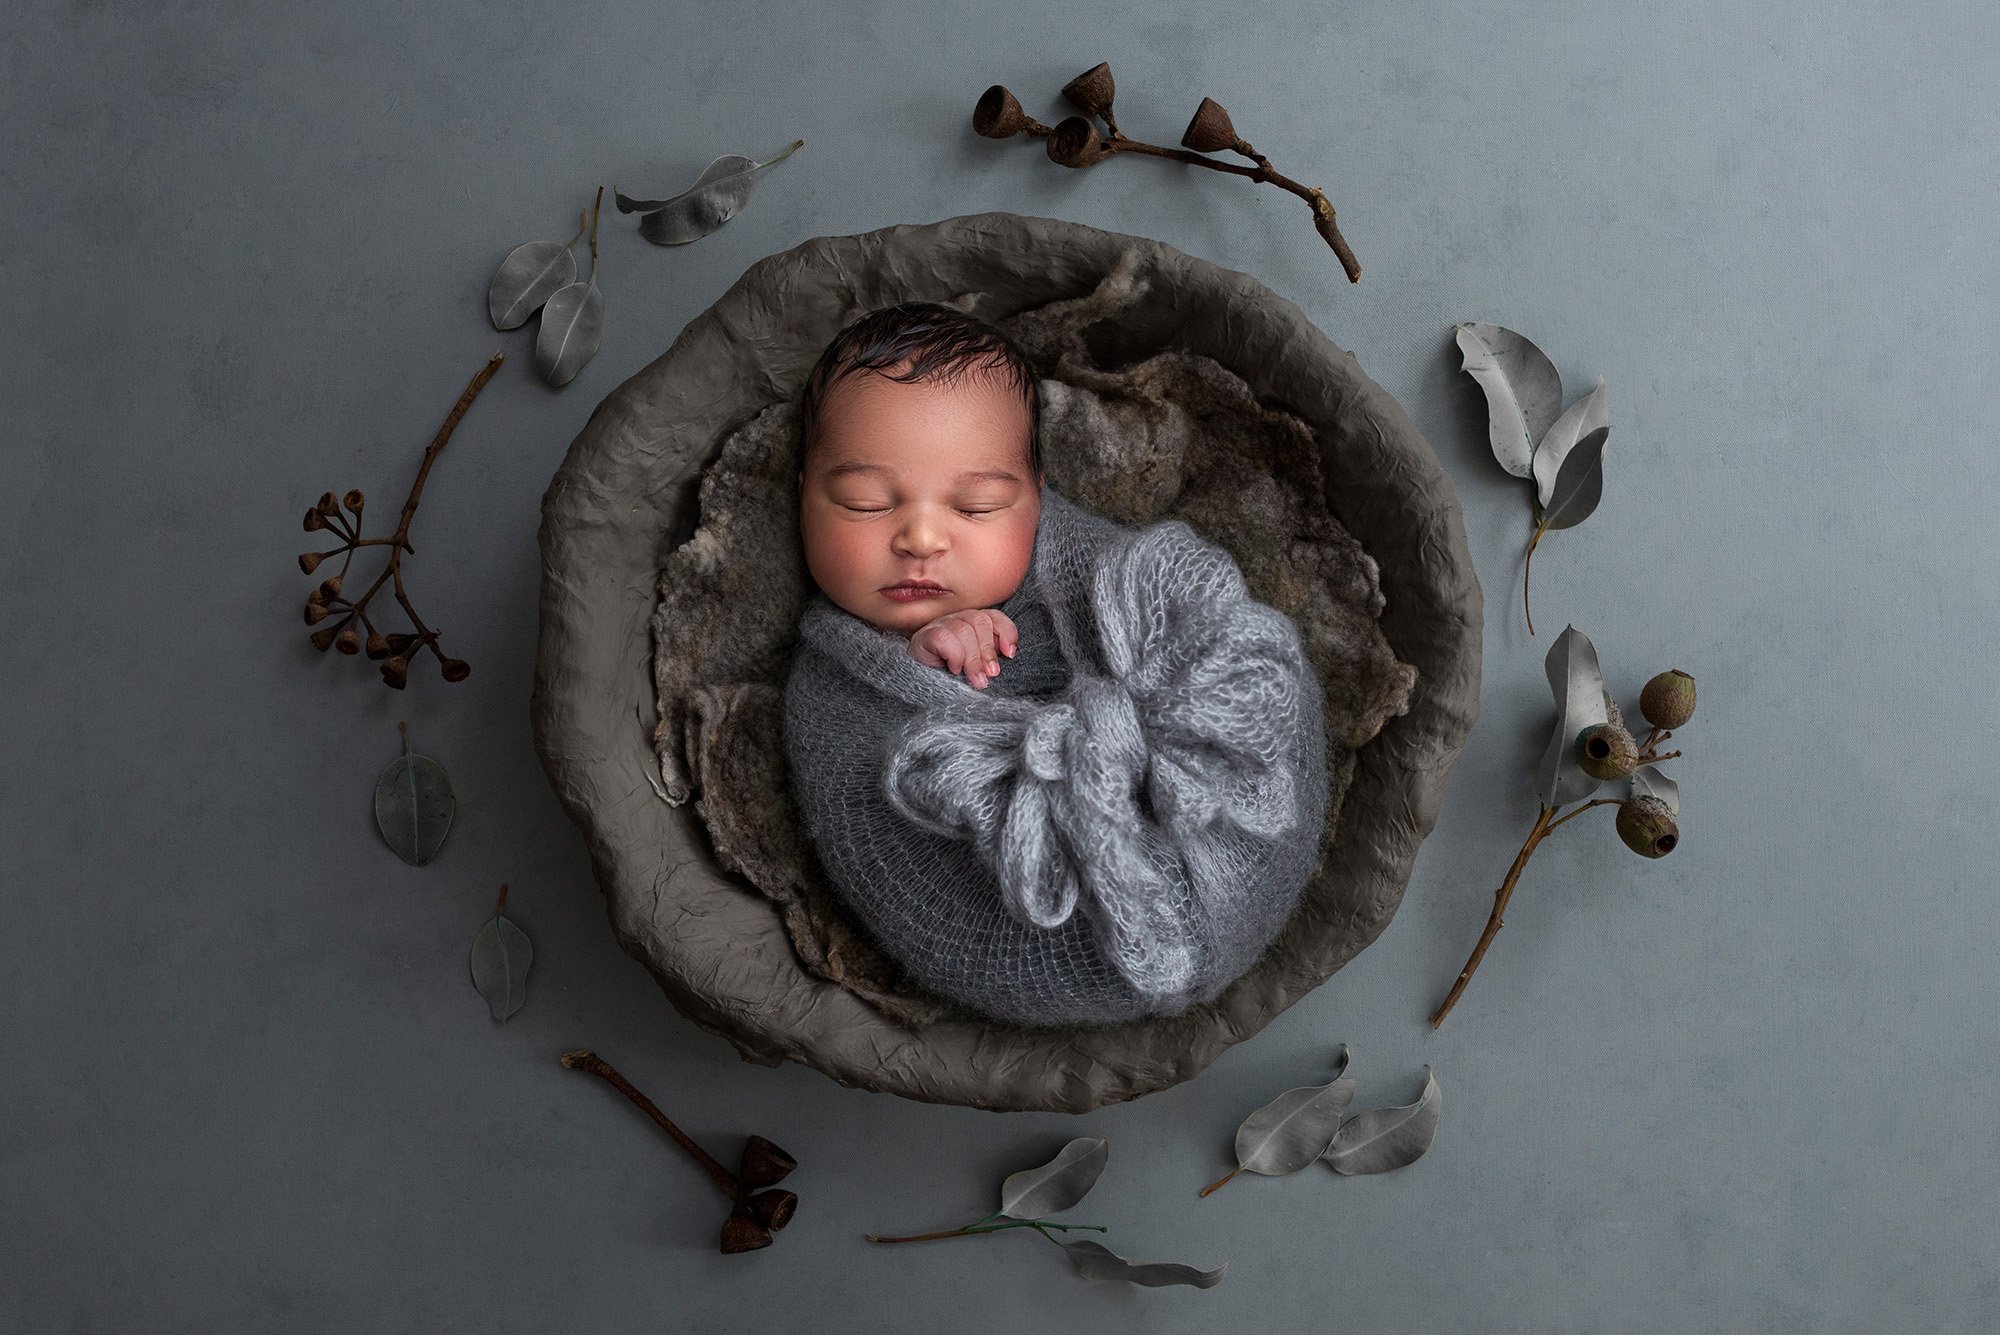 newborn baby asleep in a bowl swaddled in a blue blanket surrounded by dried flowers